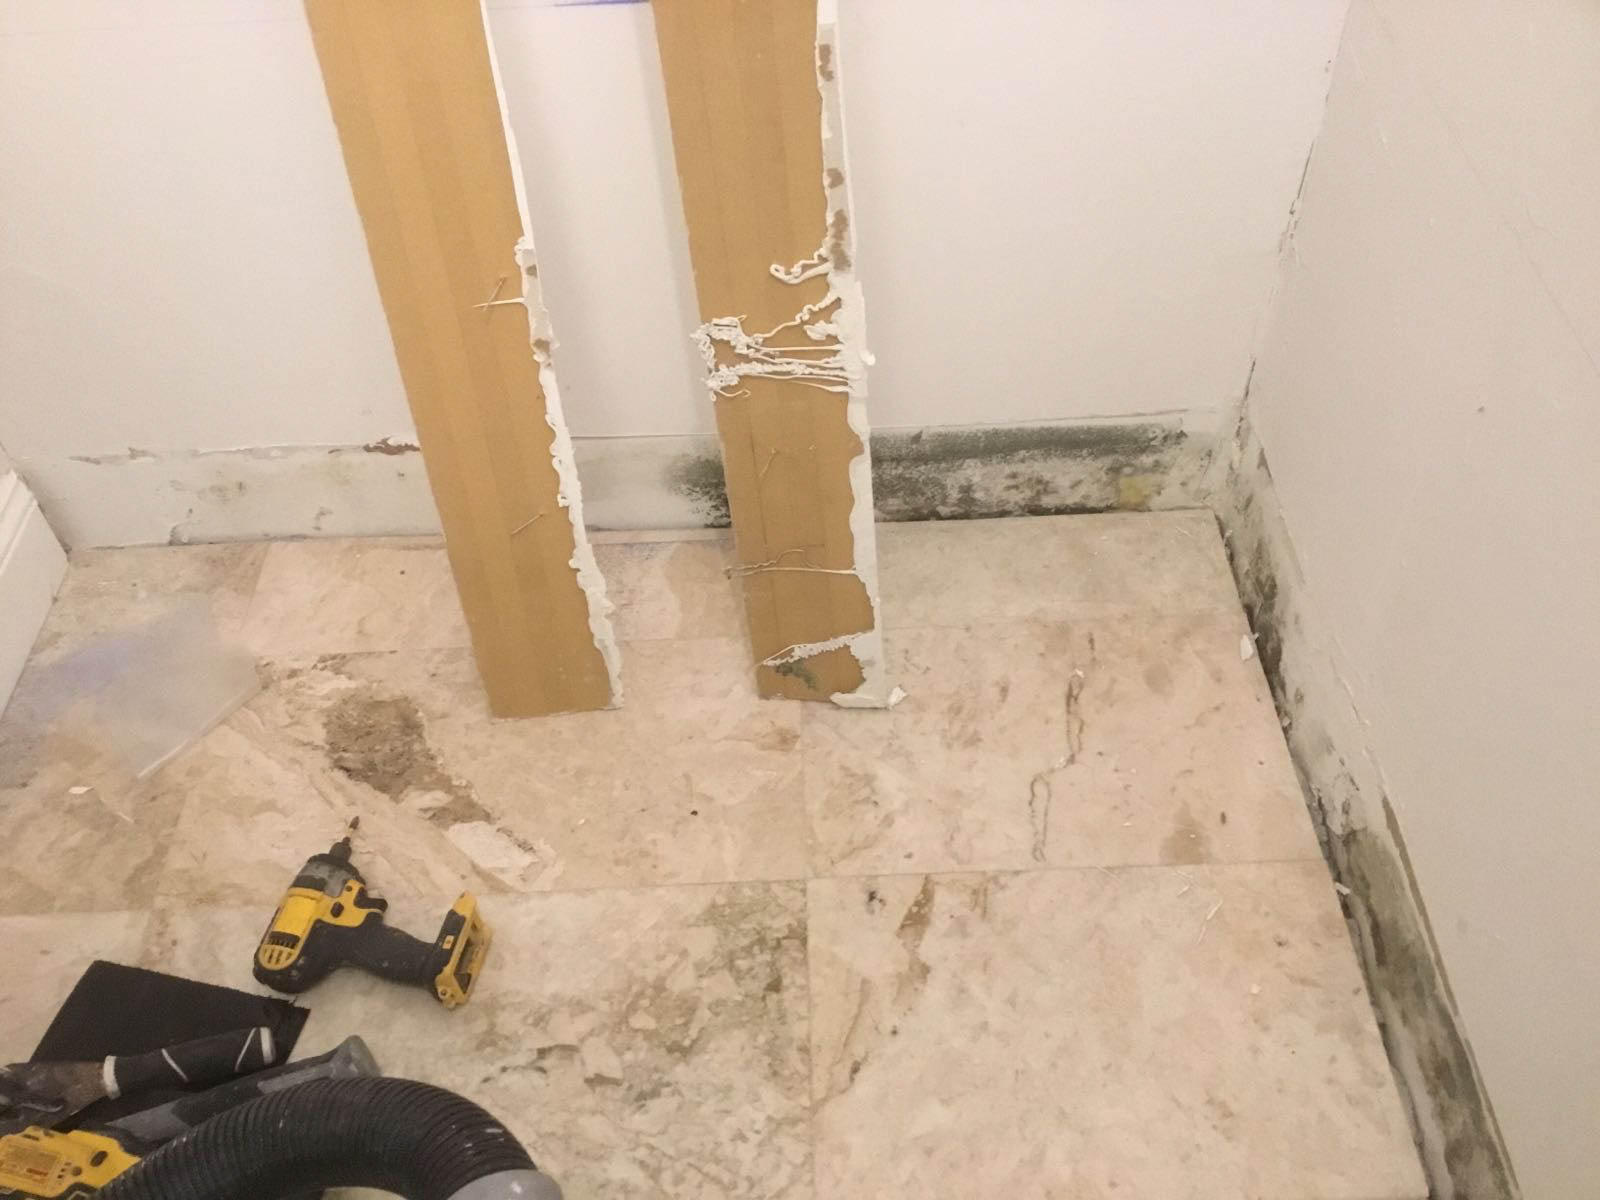 SERVPRO of Deerfield Beach is highly trained and qualified to respond to any size mold remediation e SERVPRO of Deerfield Beach Boca Raton (954)596-2208